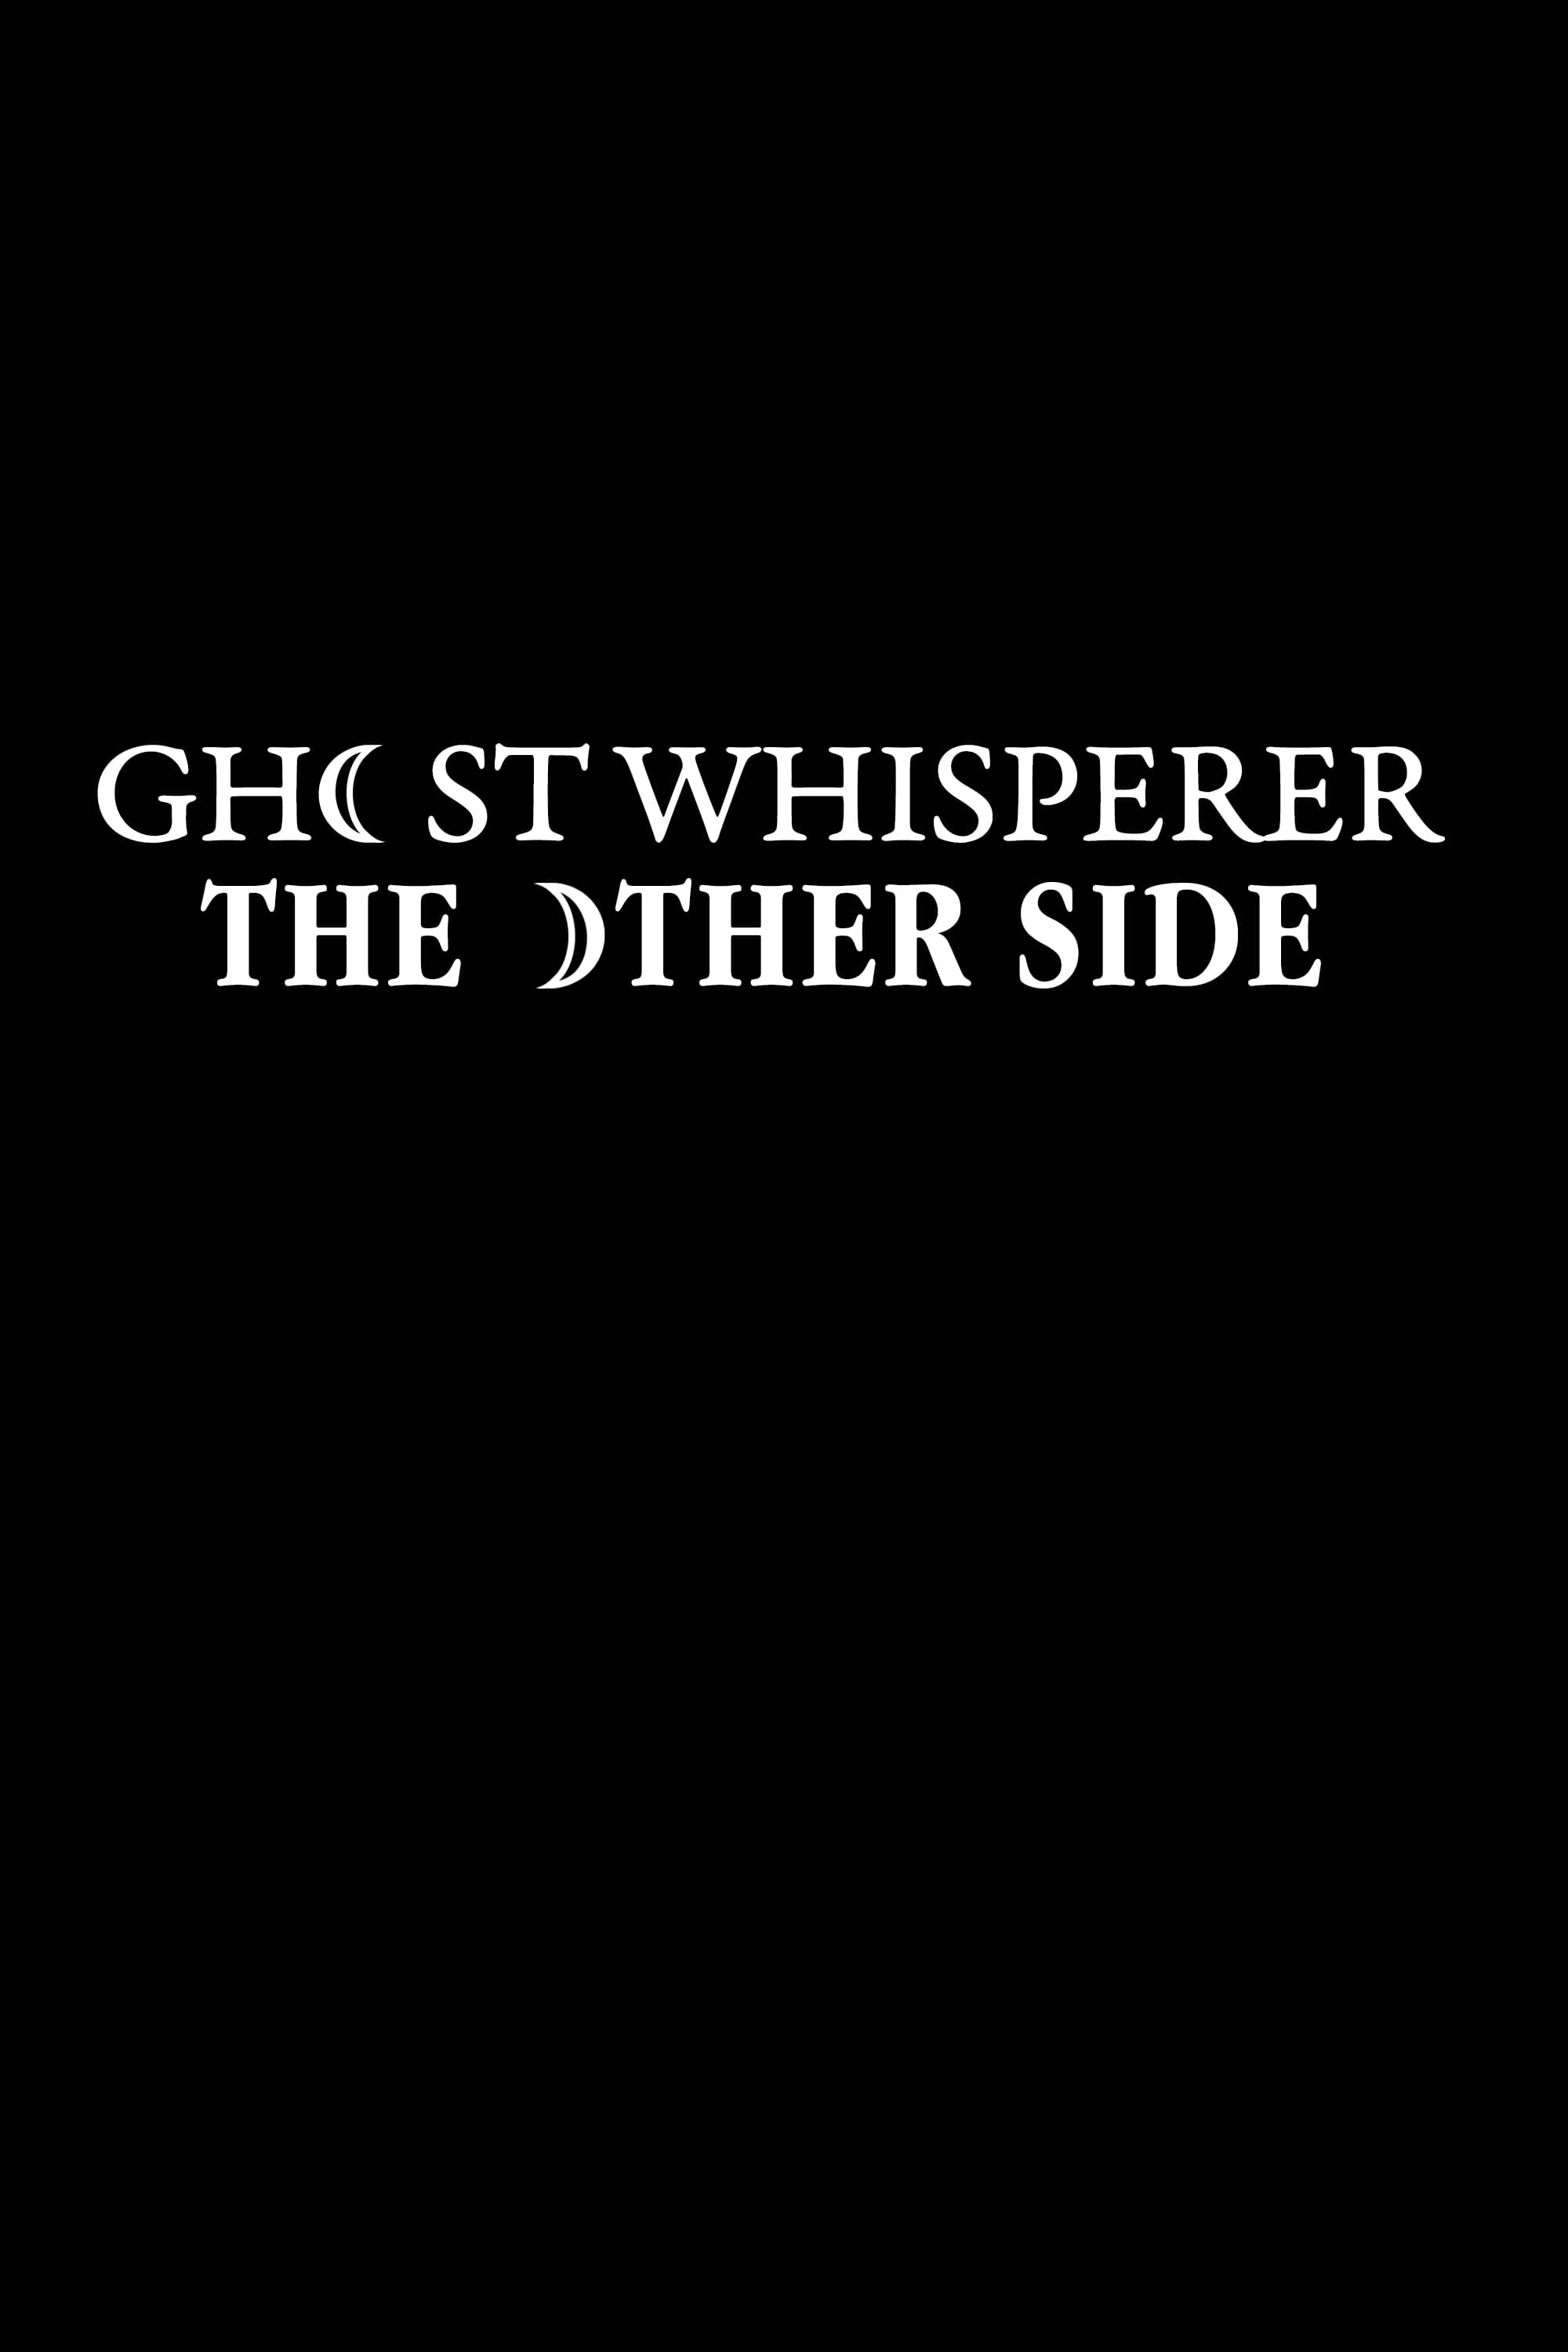 Ghost Whisperer: The Other Side